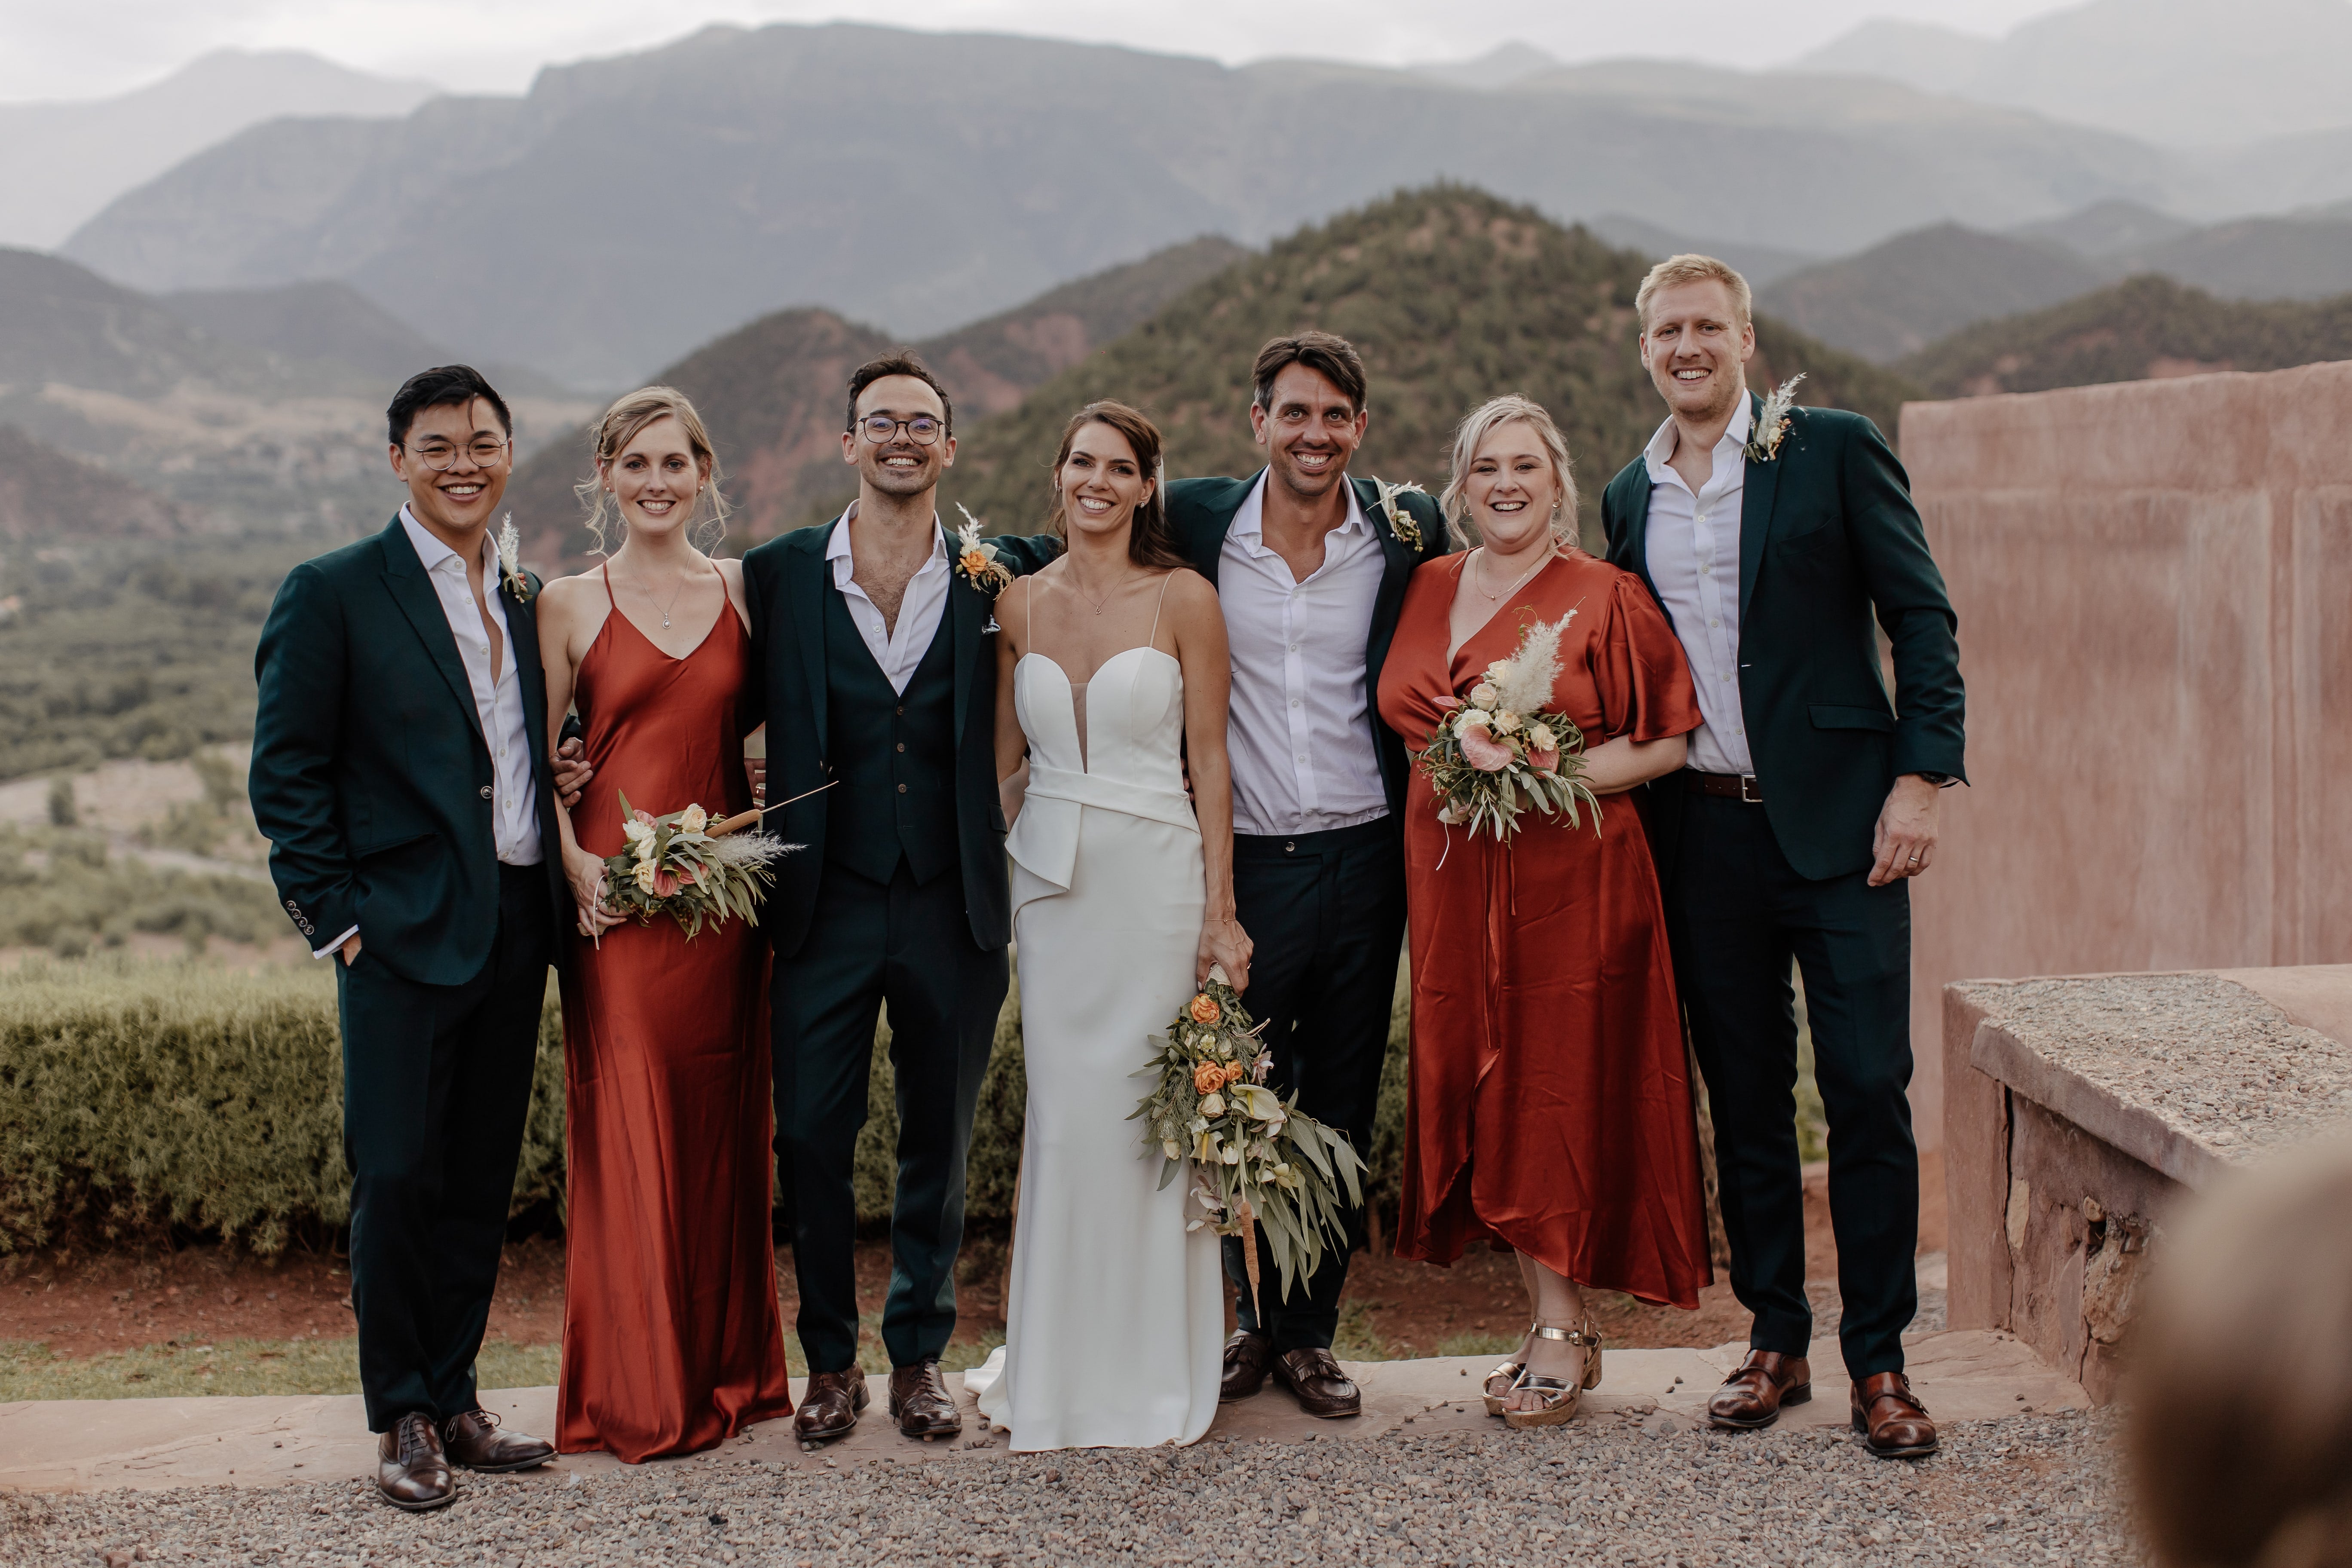 Bridal party of 7 people, including bride and groom and 2 bridesmaids and 3 best man, standing in a line in outside location with a skyline of hills in the background.